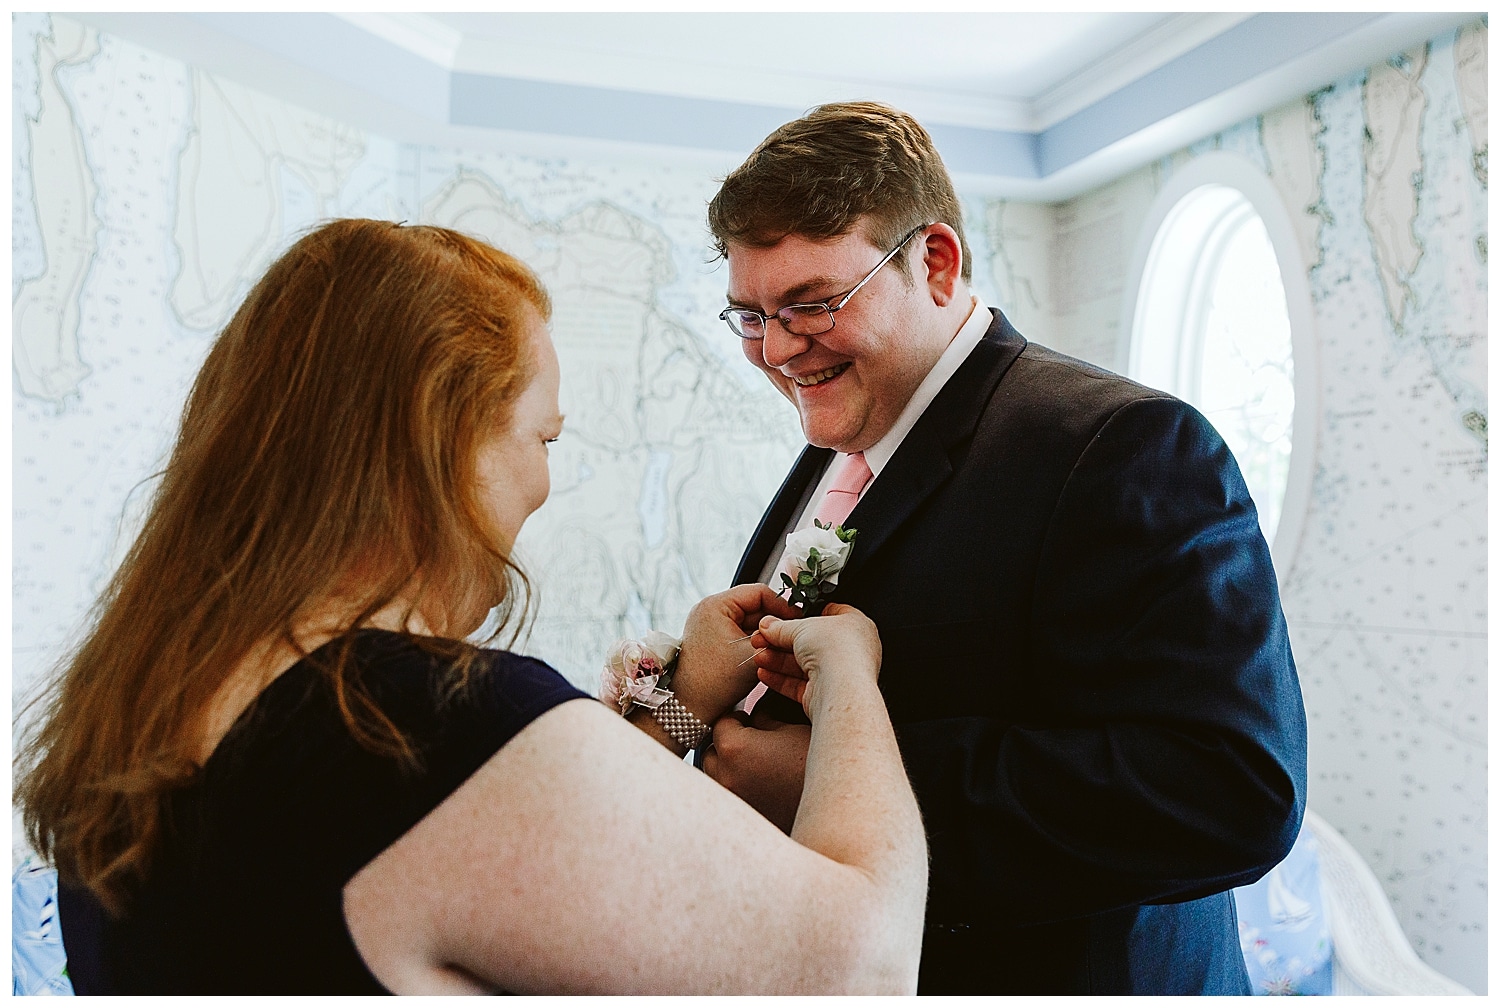 Mother of the groom attaches his boutonniere